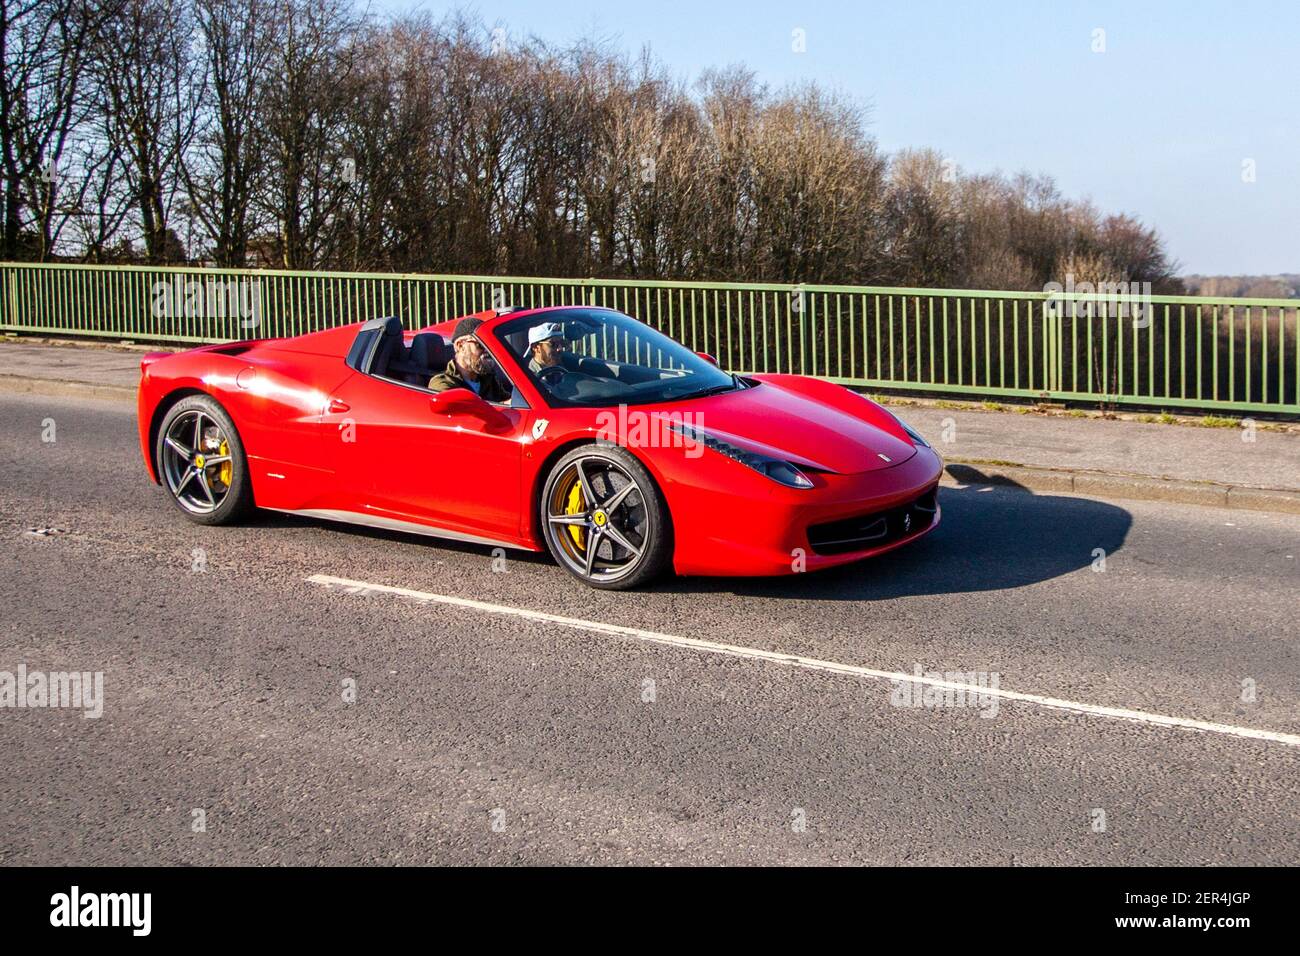 2014 red Ferrari 458 Spider Dct S-A sports car; Vehicular traffic, moving vehicles, cars, vehicle driving on UK roads, motors, motoring on the M6 motorway highway UK road network Stock Photo